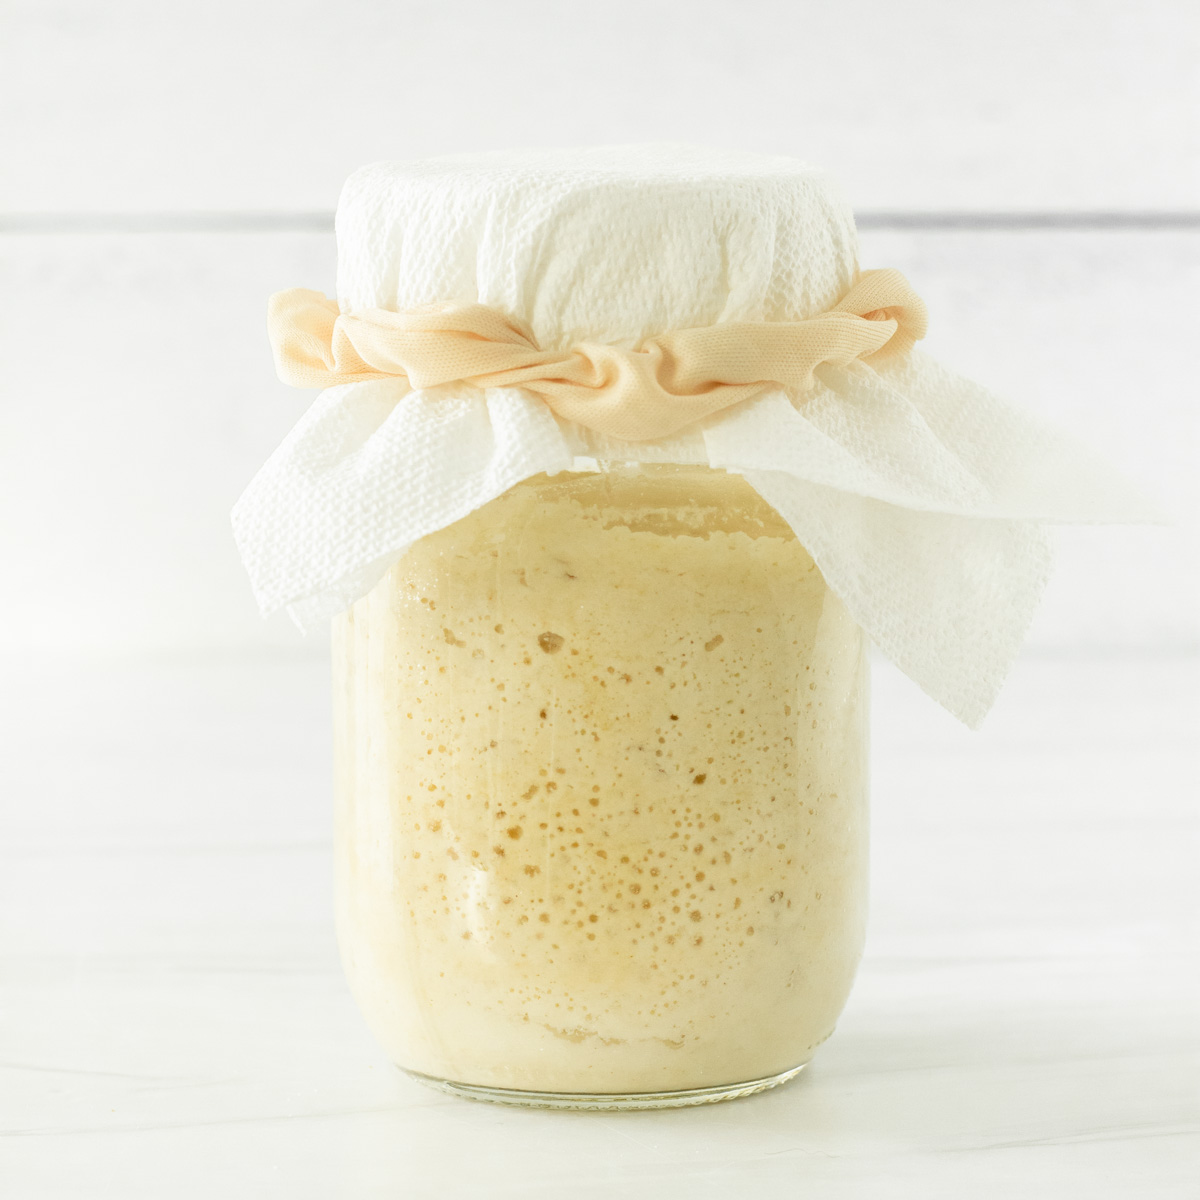 Learn how to make a gluten-free sourdough starter in 7 days and how to maintain a gluten-free sourdough starter to make gluten-free sourdough recipes like gluten-free sourdough bread.